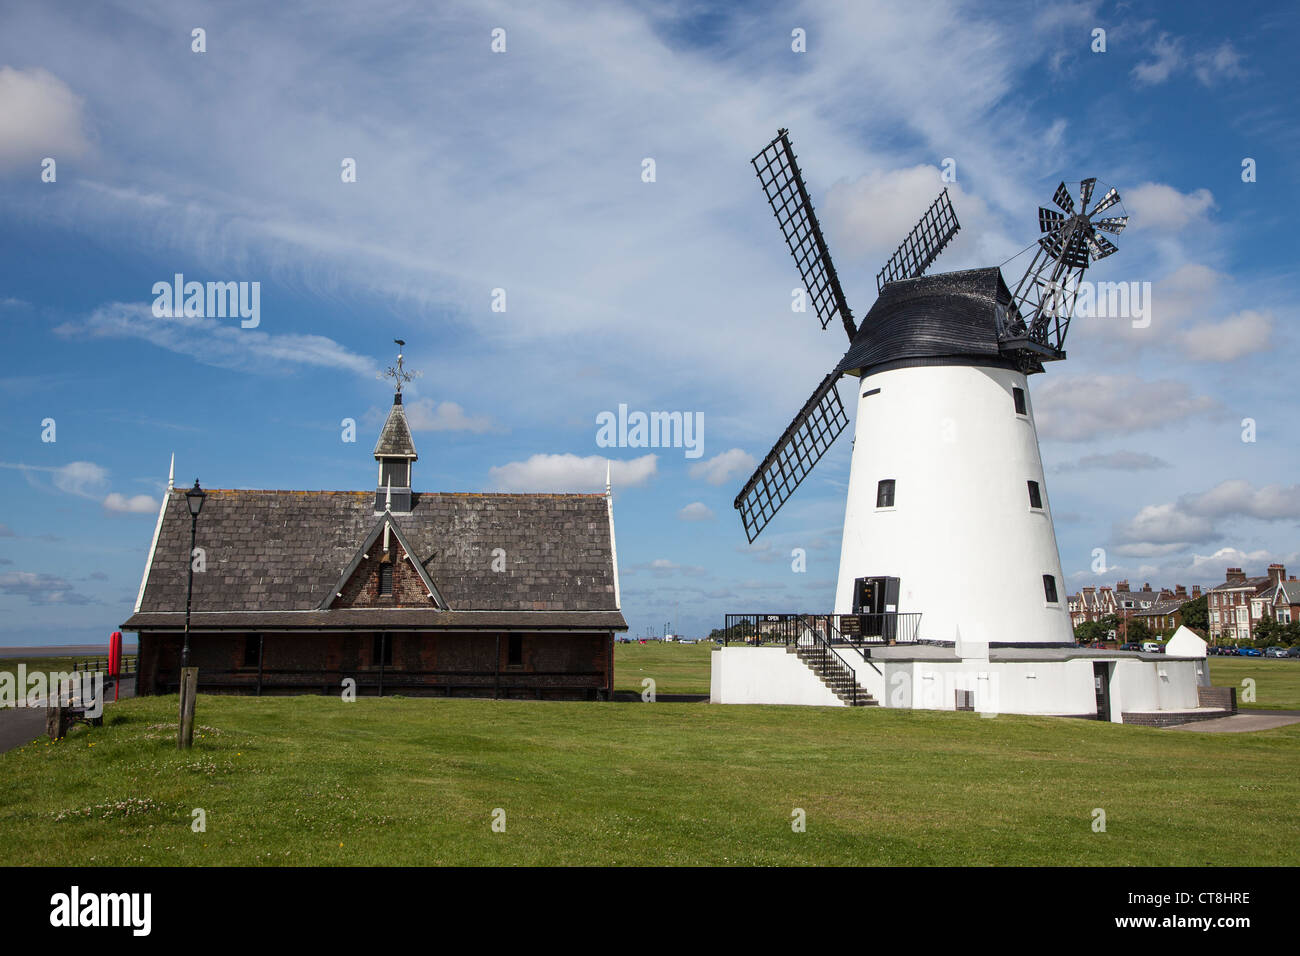 Lytham windmill and lifeboat museum, Lytham St. Anne's, Lancashire, England Stock Photo